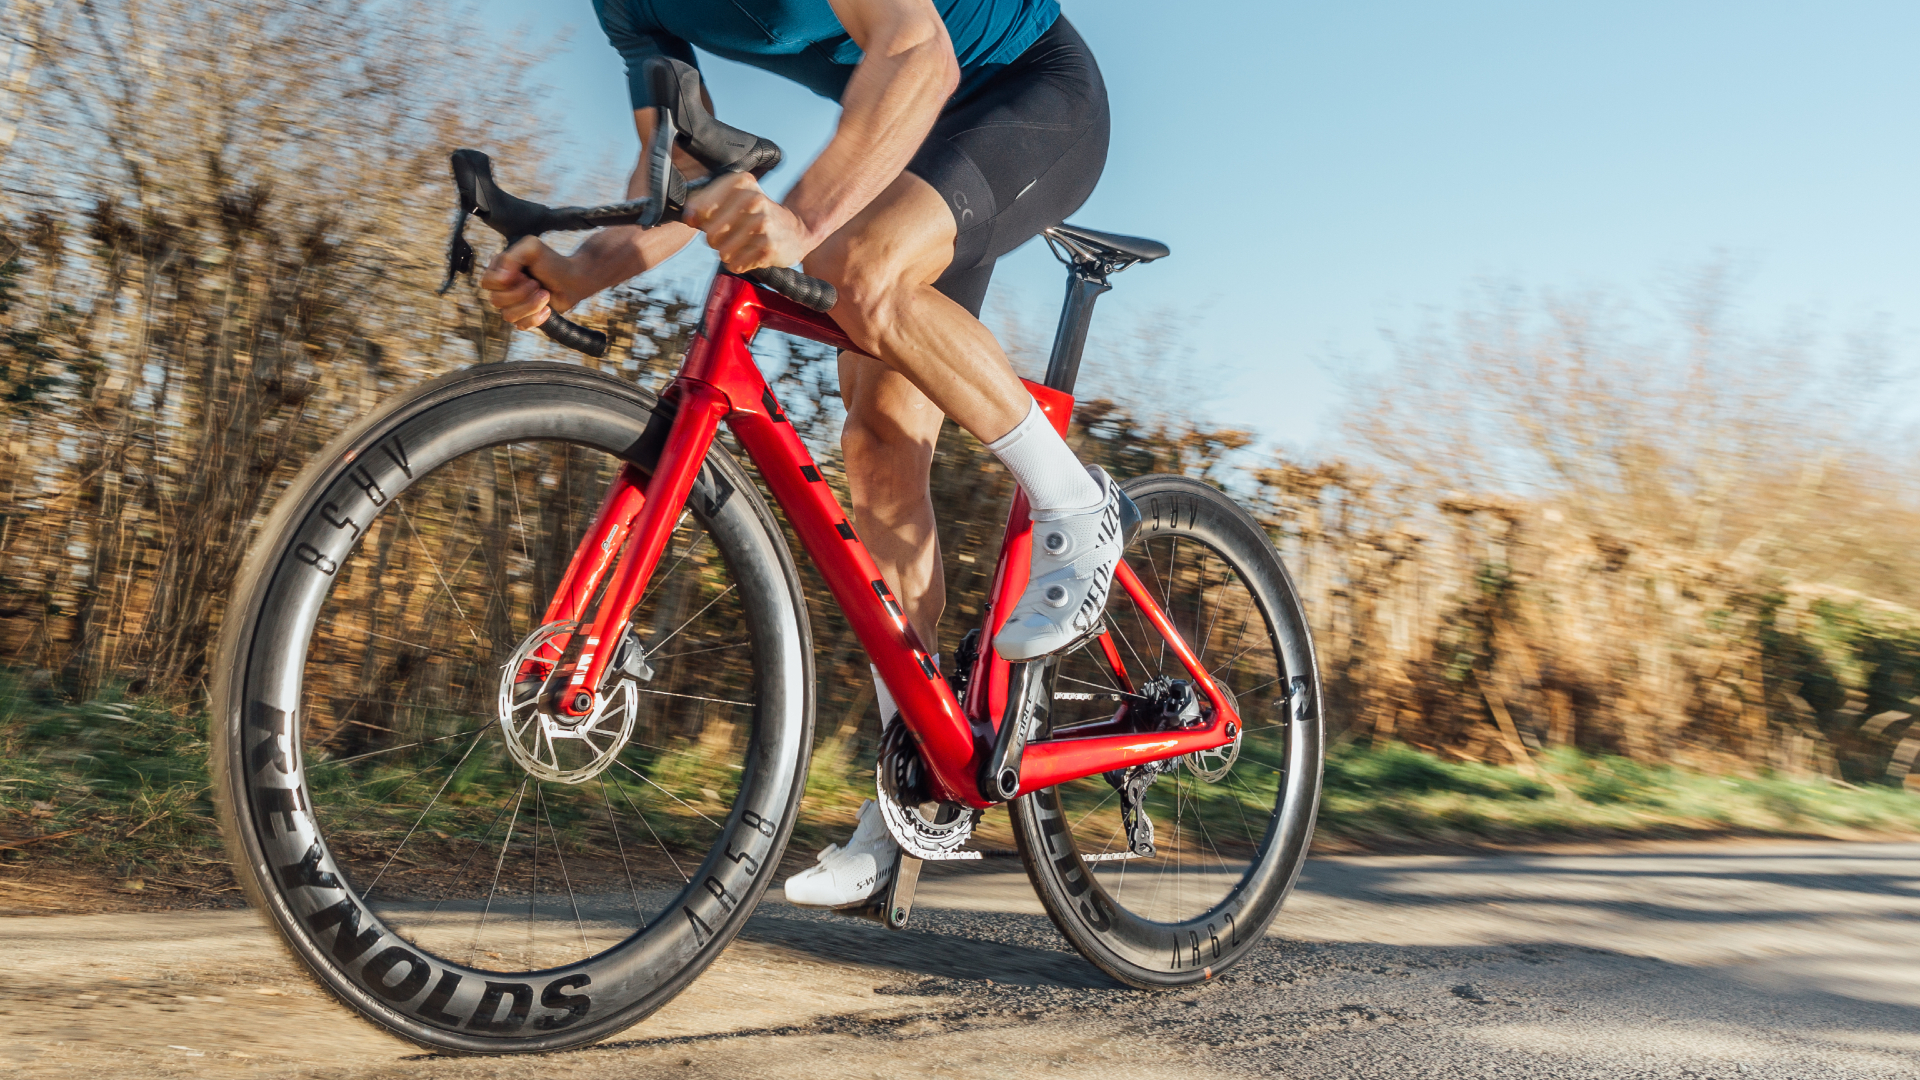 10 EASY TIPS TO IMPROVE YOUR TUBELESS TIRE EXPERIENCE - Road Bike